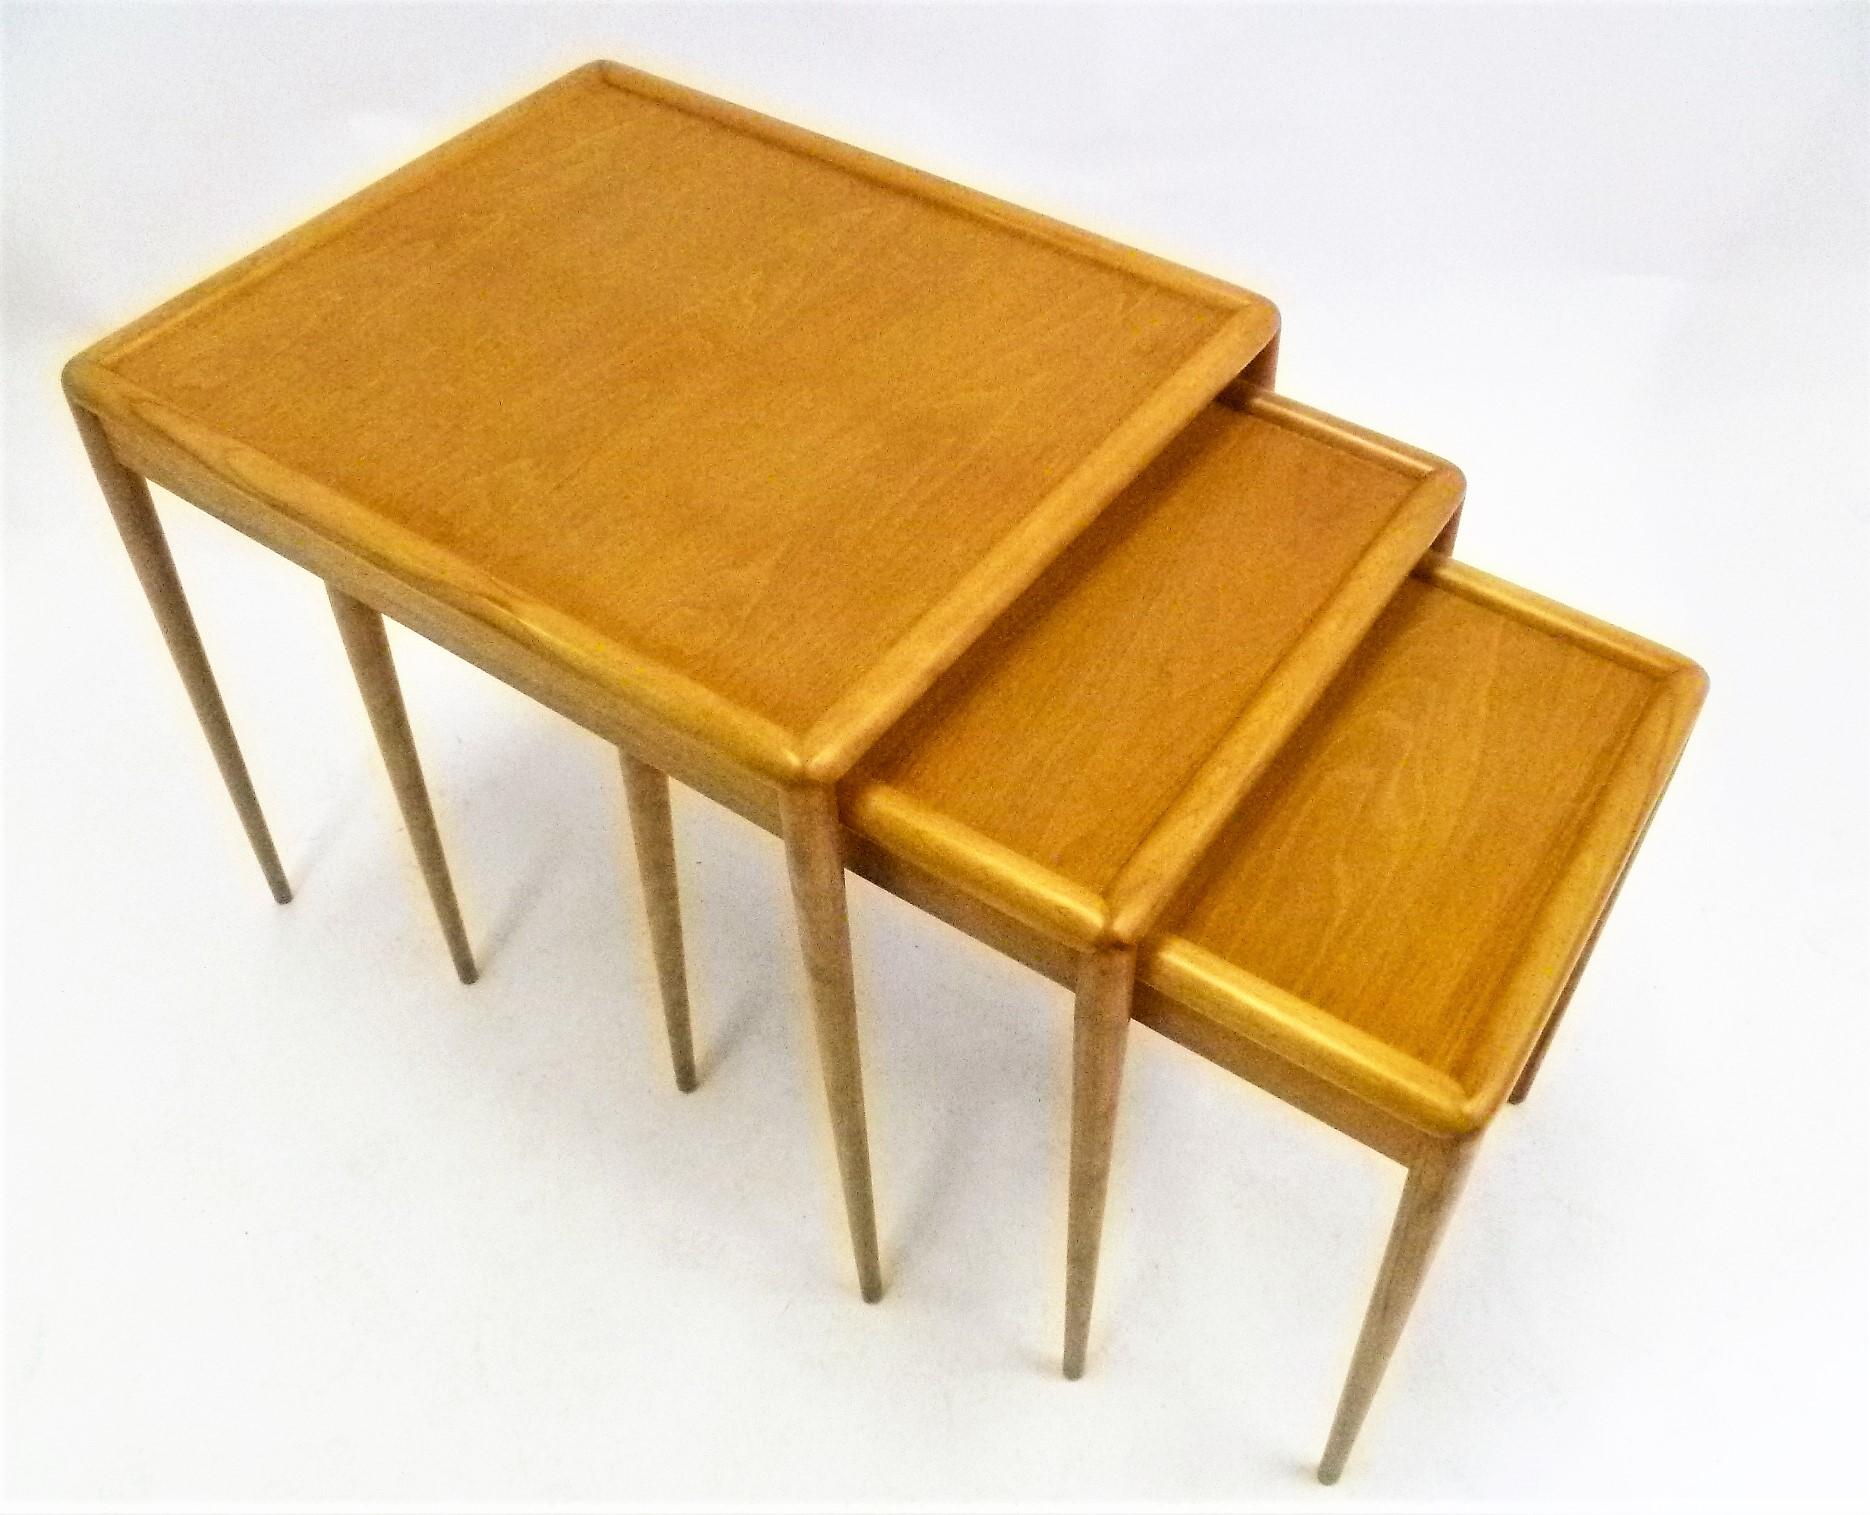 REDUCED FROM $3,250...Super set of three matching Mid Century Modern nesting / stacking tables by T.H. Robsjohn-Gibbings for Widdicomb model no. 1783. In very, very good condition. Beautiful blond figured walnut in sorrel finish, retains signature